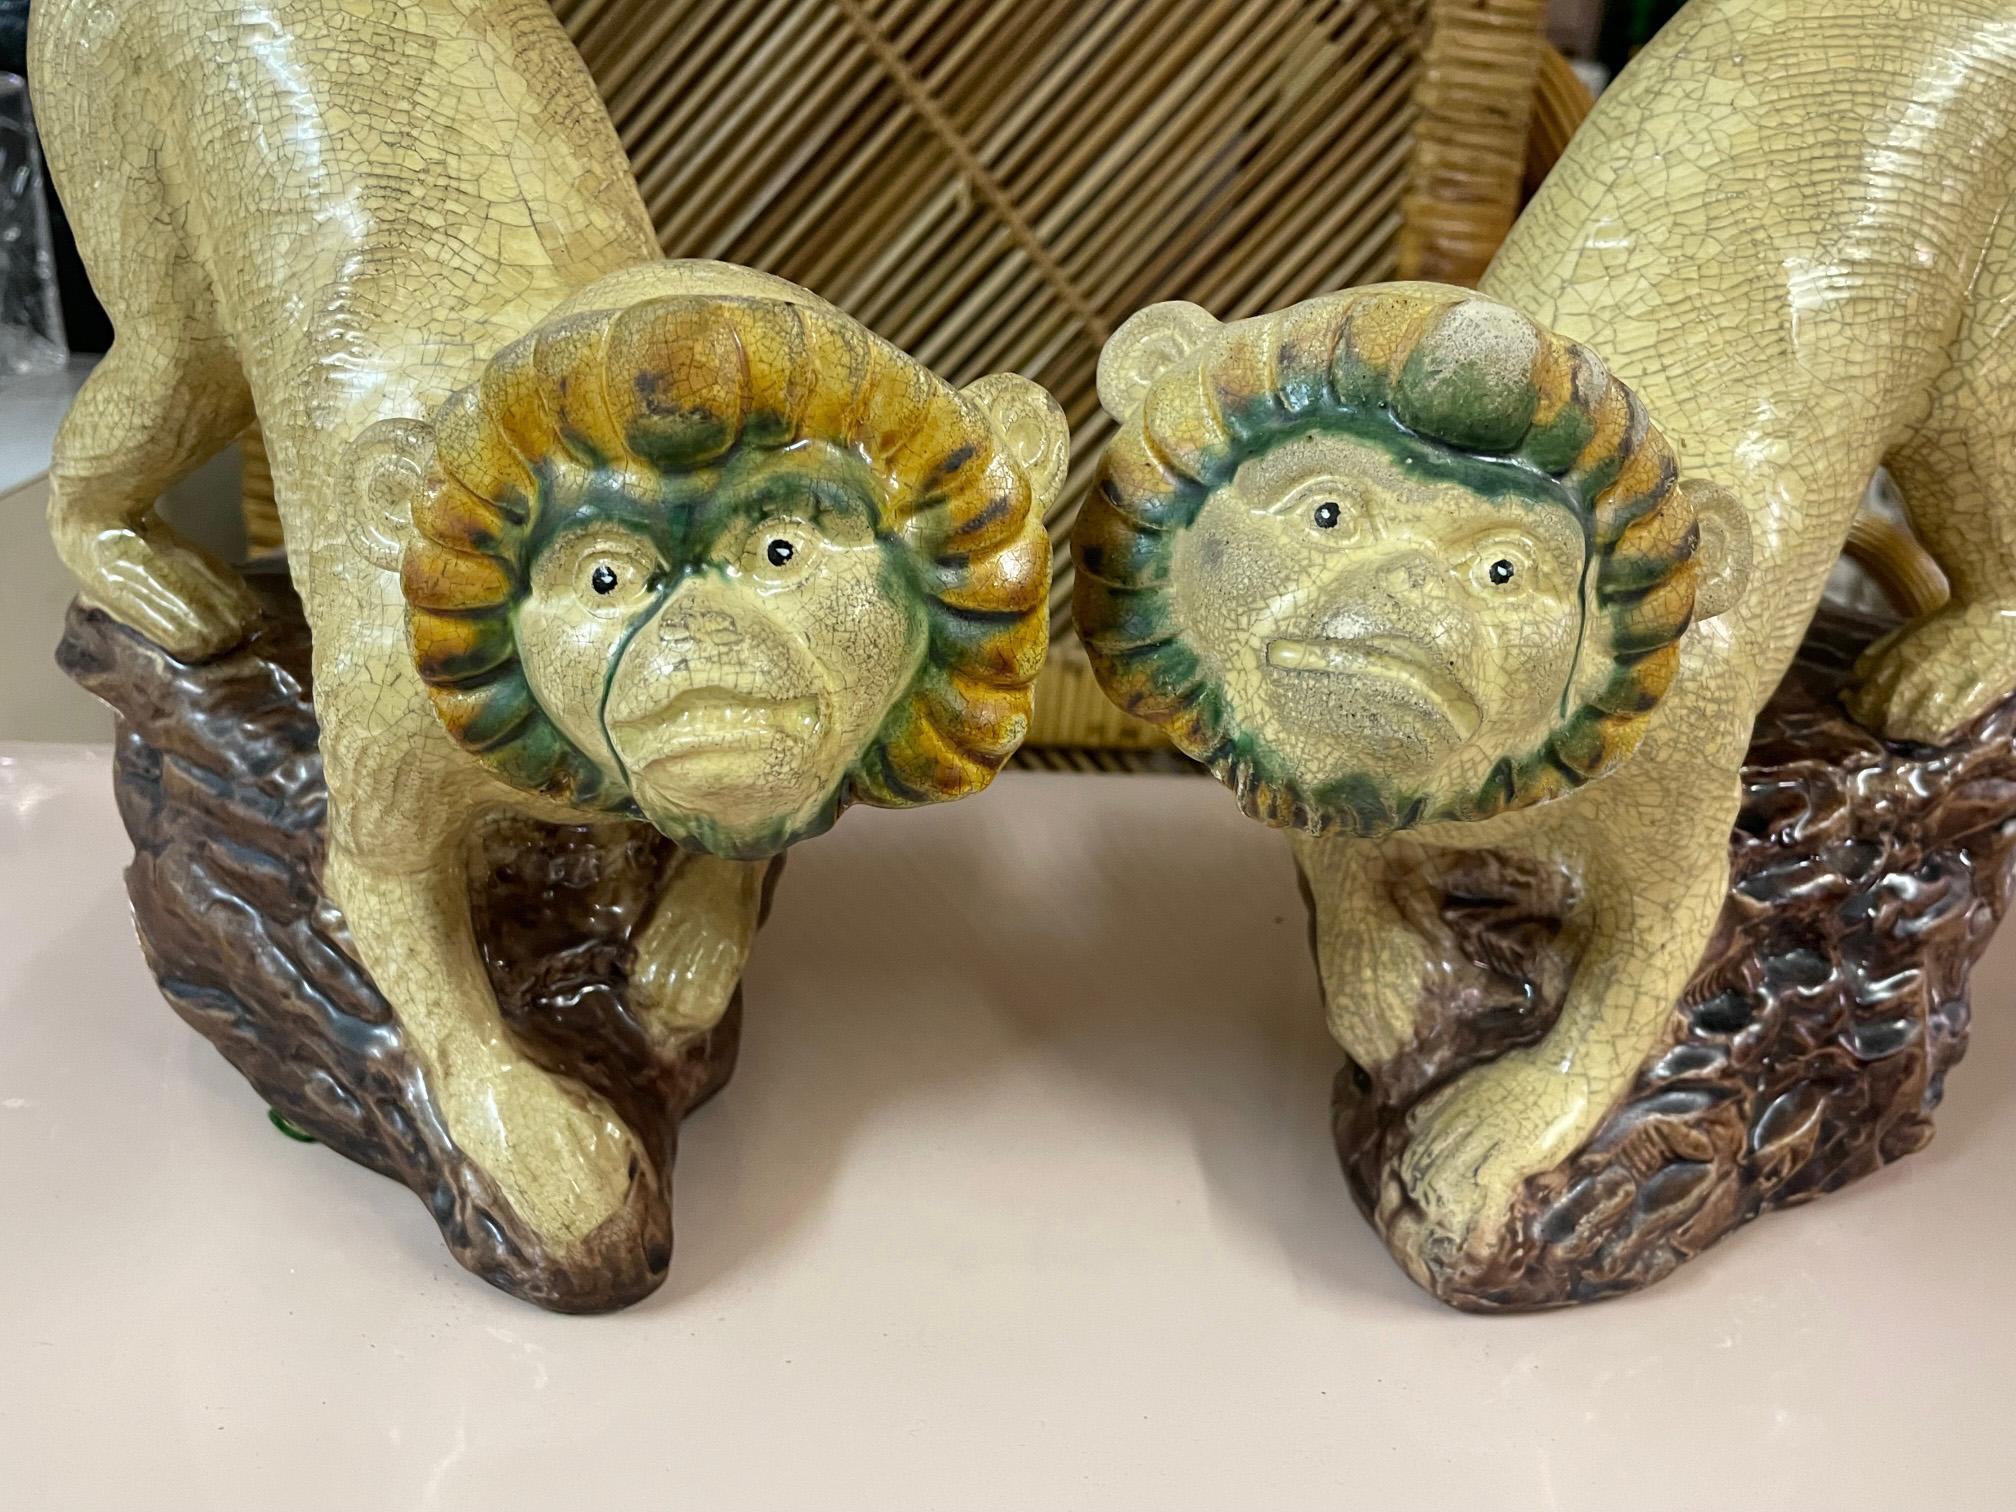 Vintage monkey figurines are hand painted and stand left and right facing. Even crazing throughout and original paint drips show wonderful age and patina. Perfect for display in any decor. Good vintage condition with imperfections consistent with